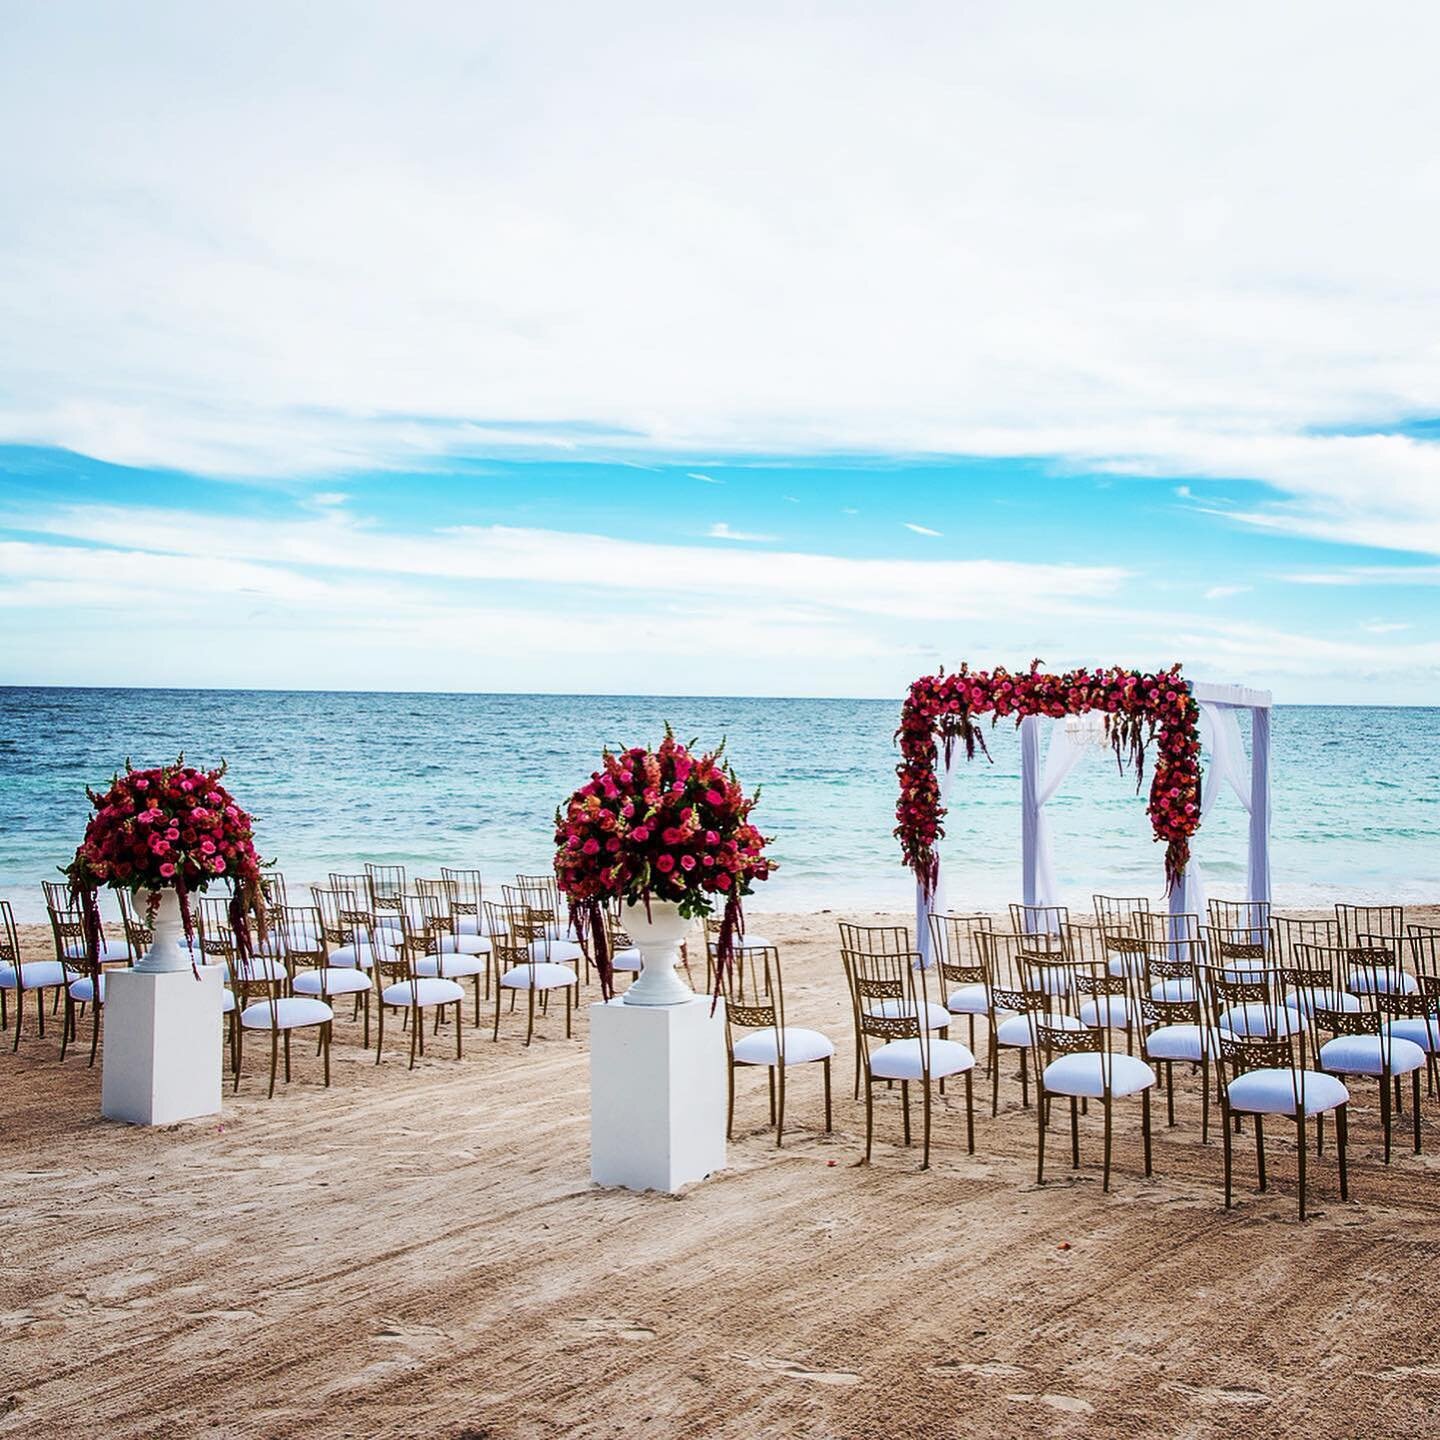 AM Resorts are experts in the destination wedding field! We love these resorts so much that we have booked 5 of our couple&rsquo;s weddings this past month at various AM Resorts. They are all unique, so it&rsquo;s important to pick the resort that&rs